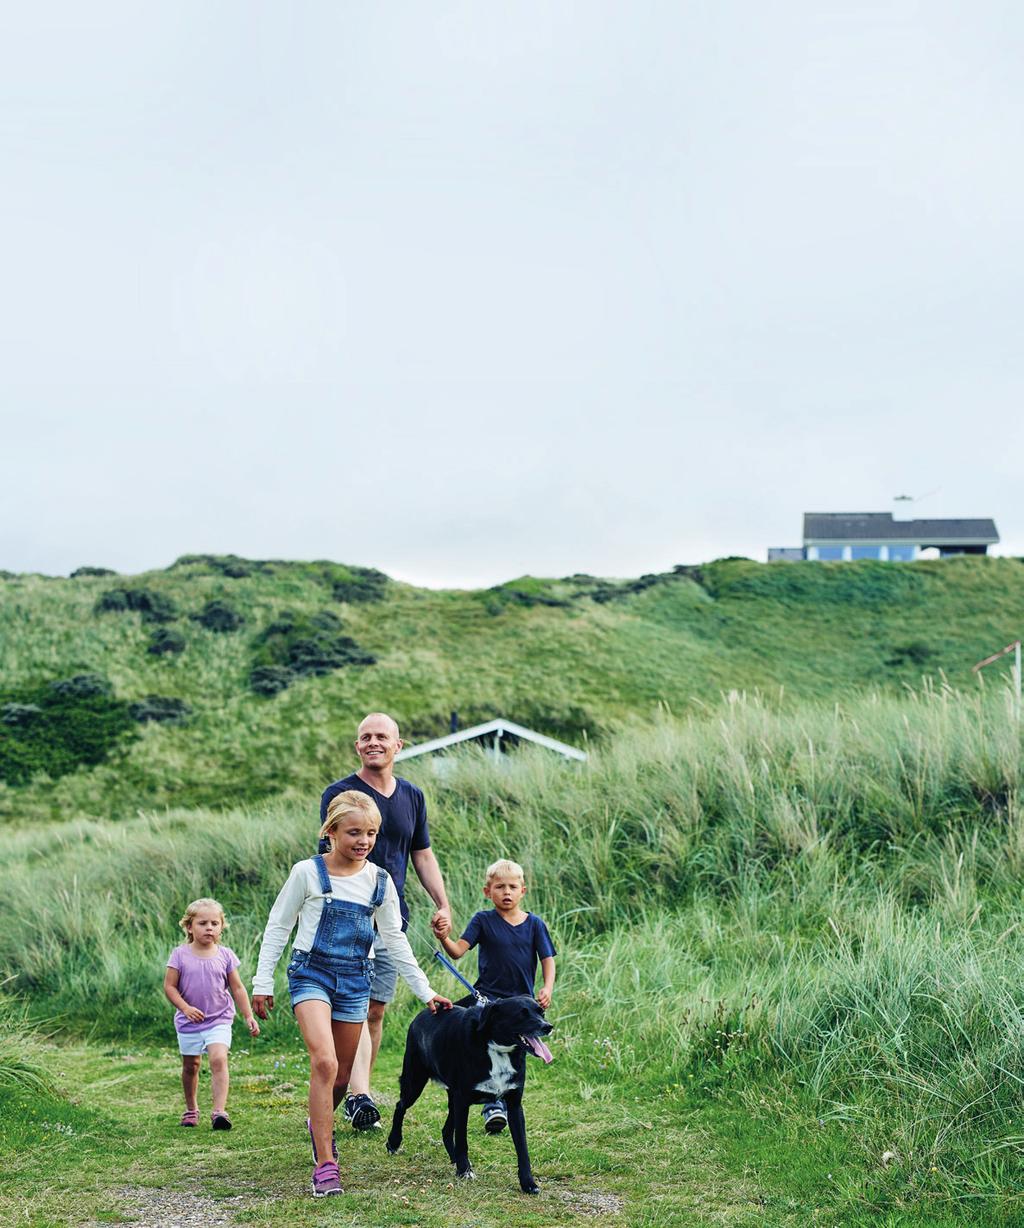 5 FAMILIES Denmark has strong public day-care and educational systems, and if you take residence, work and pay taxes in Denmark you have access to free public healthcare.